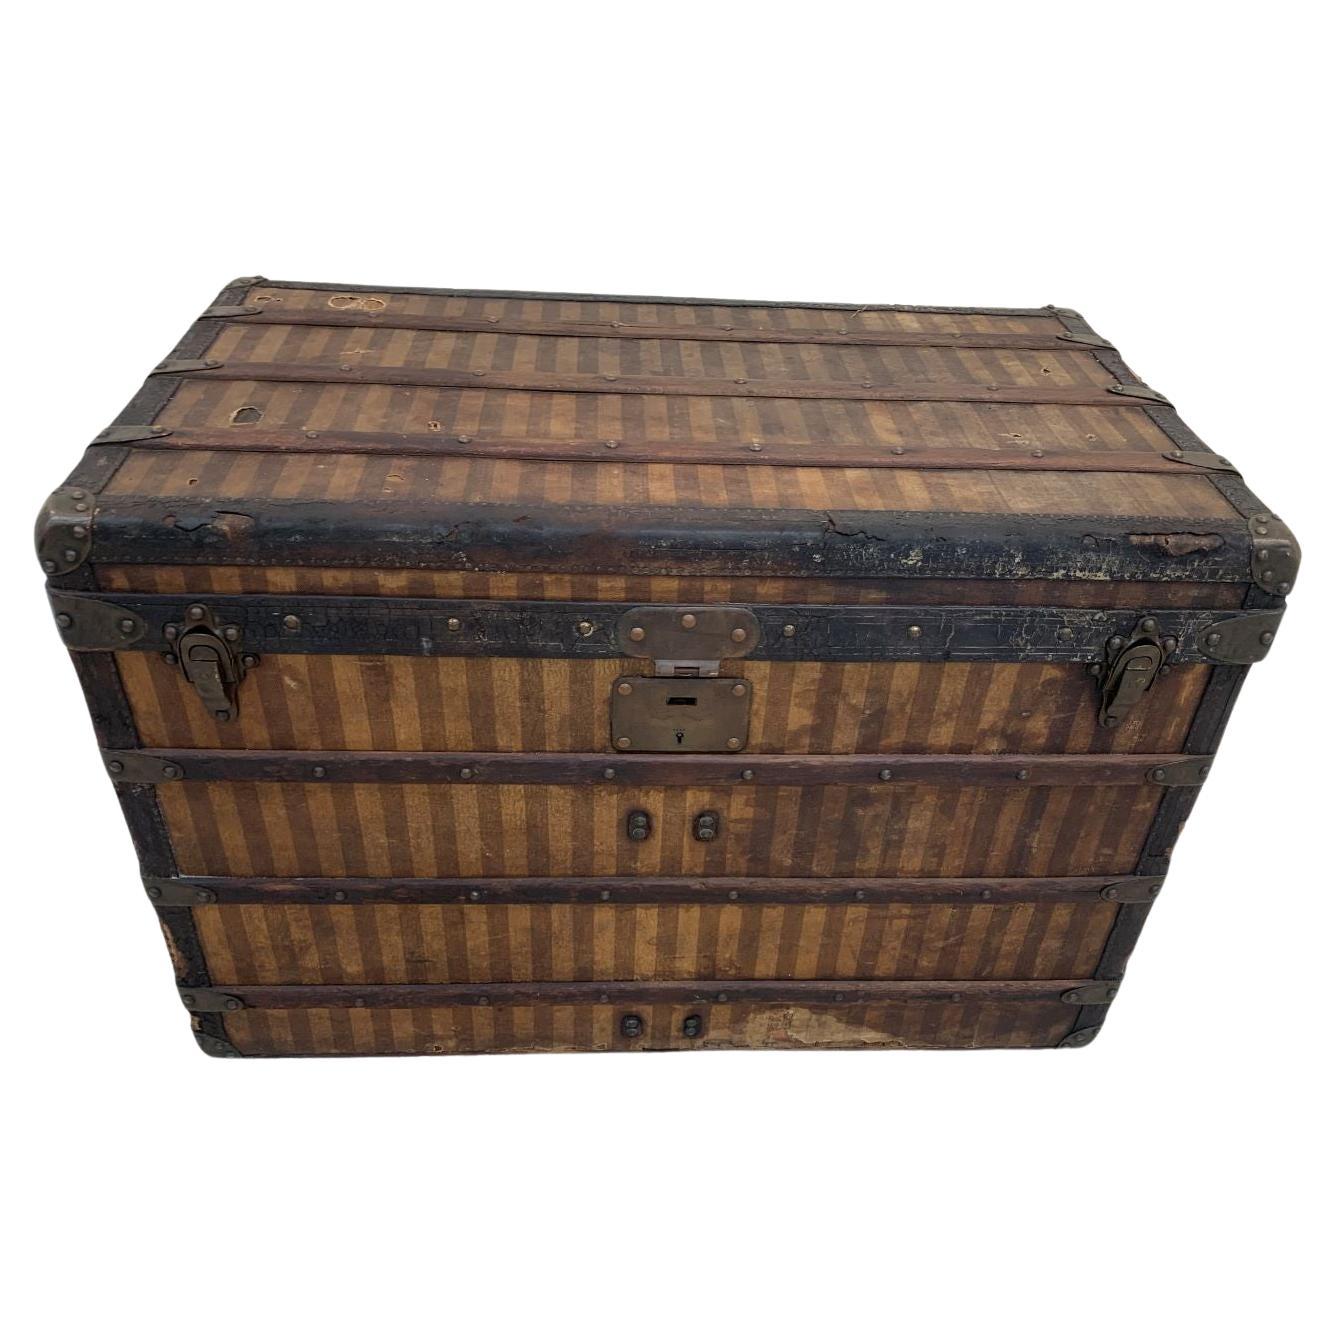 The striped trunk of the Louis Vuitton brand corresponds to the years  1876-1888